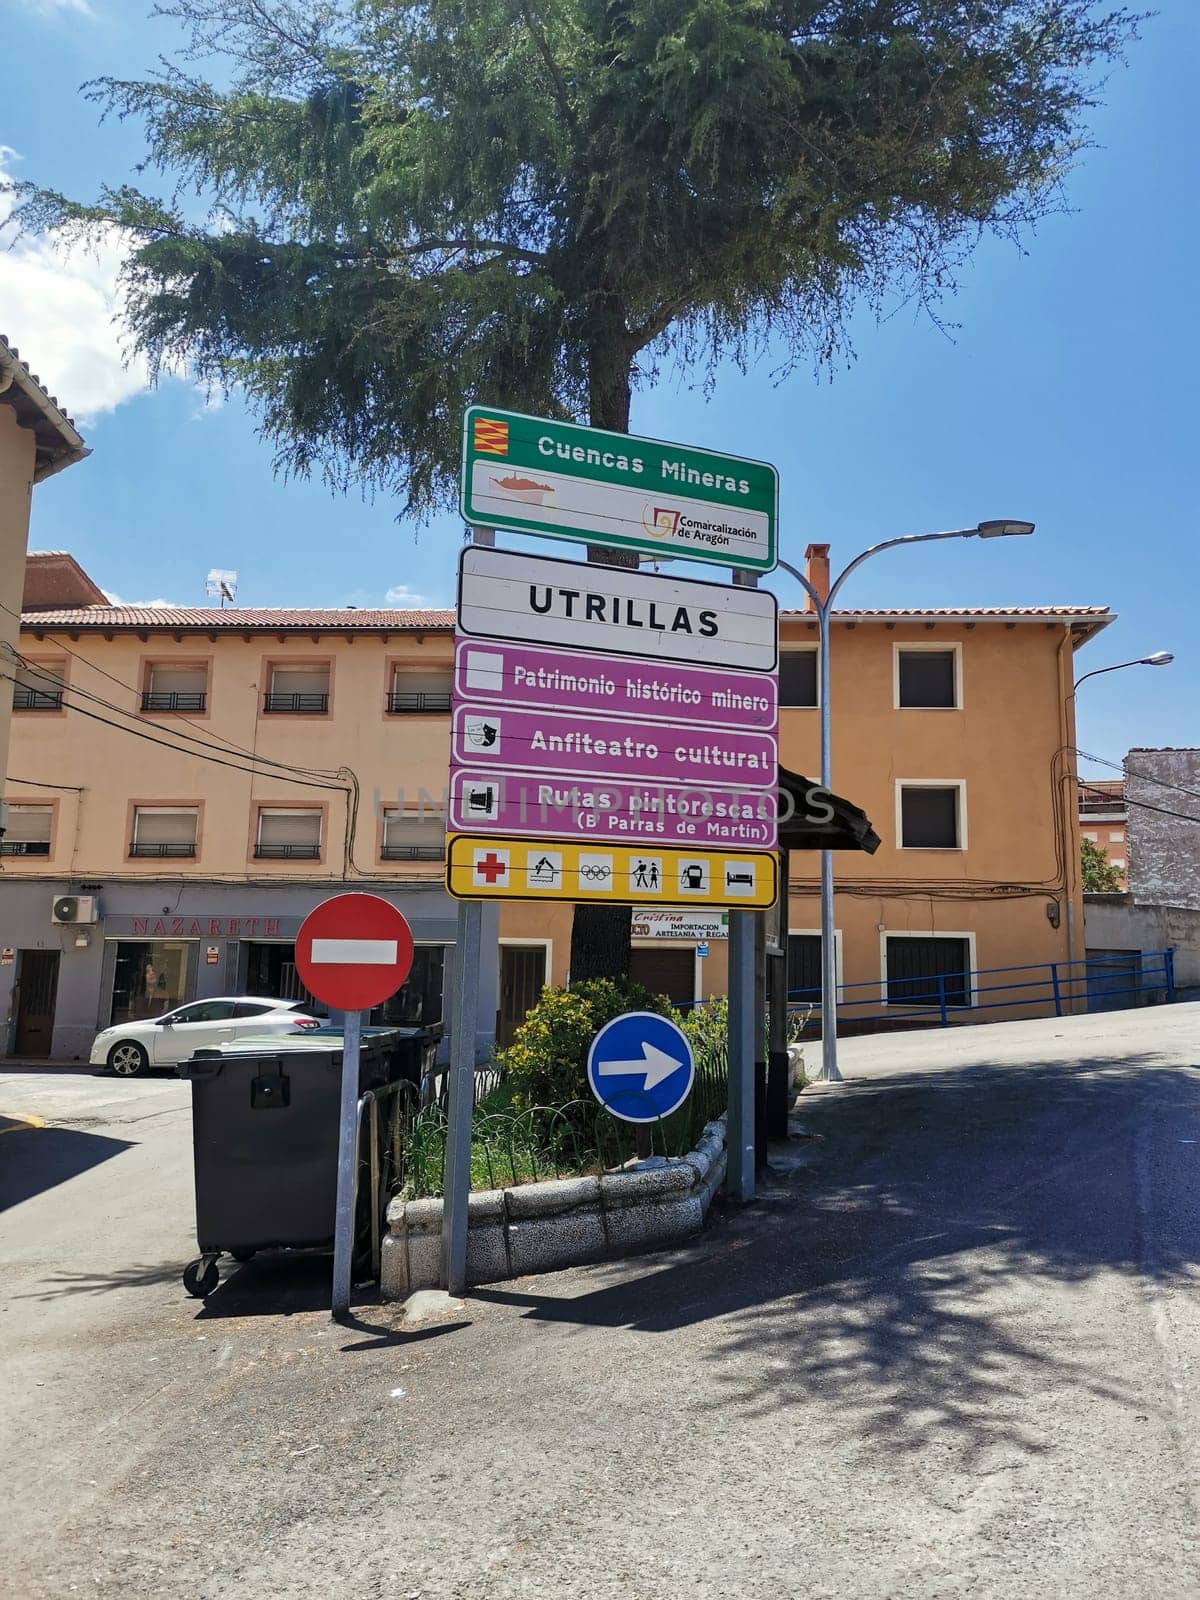 signs at the entrance to the town of utrillas, Teruel Spain